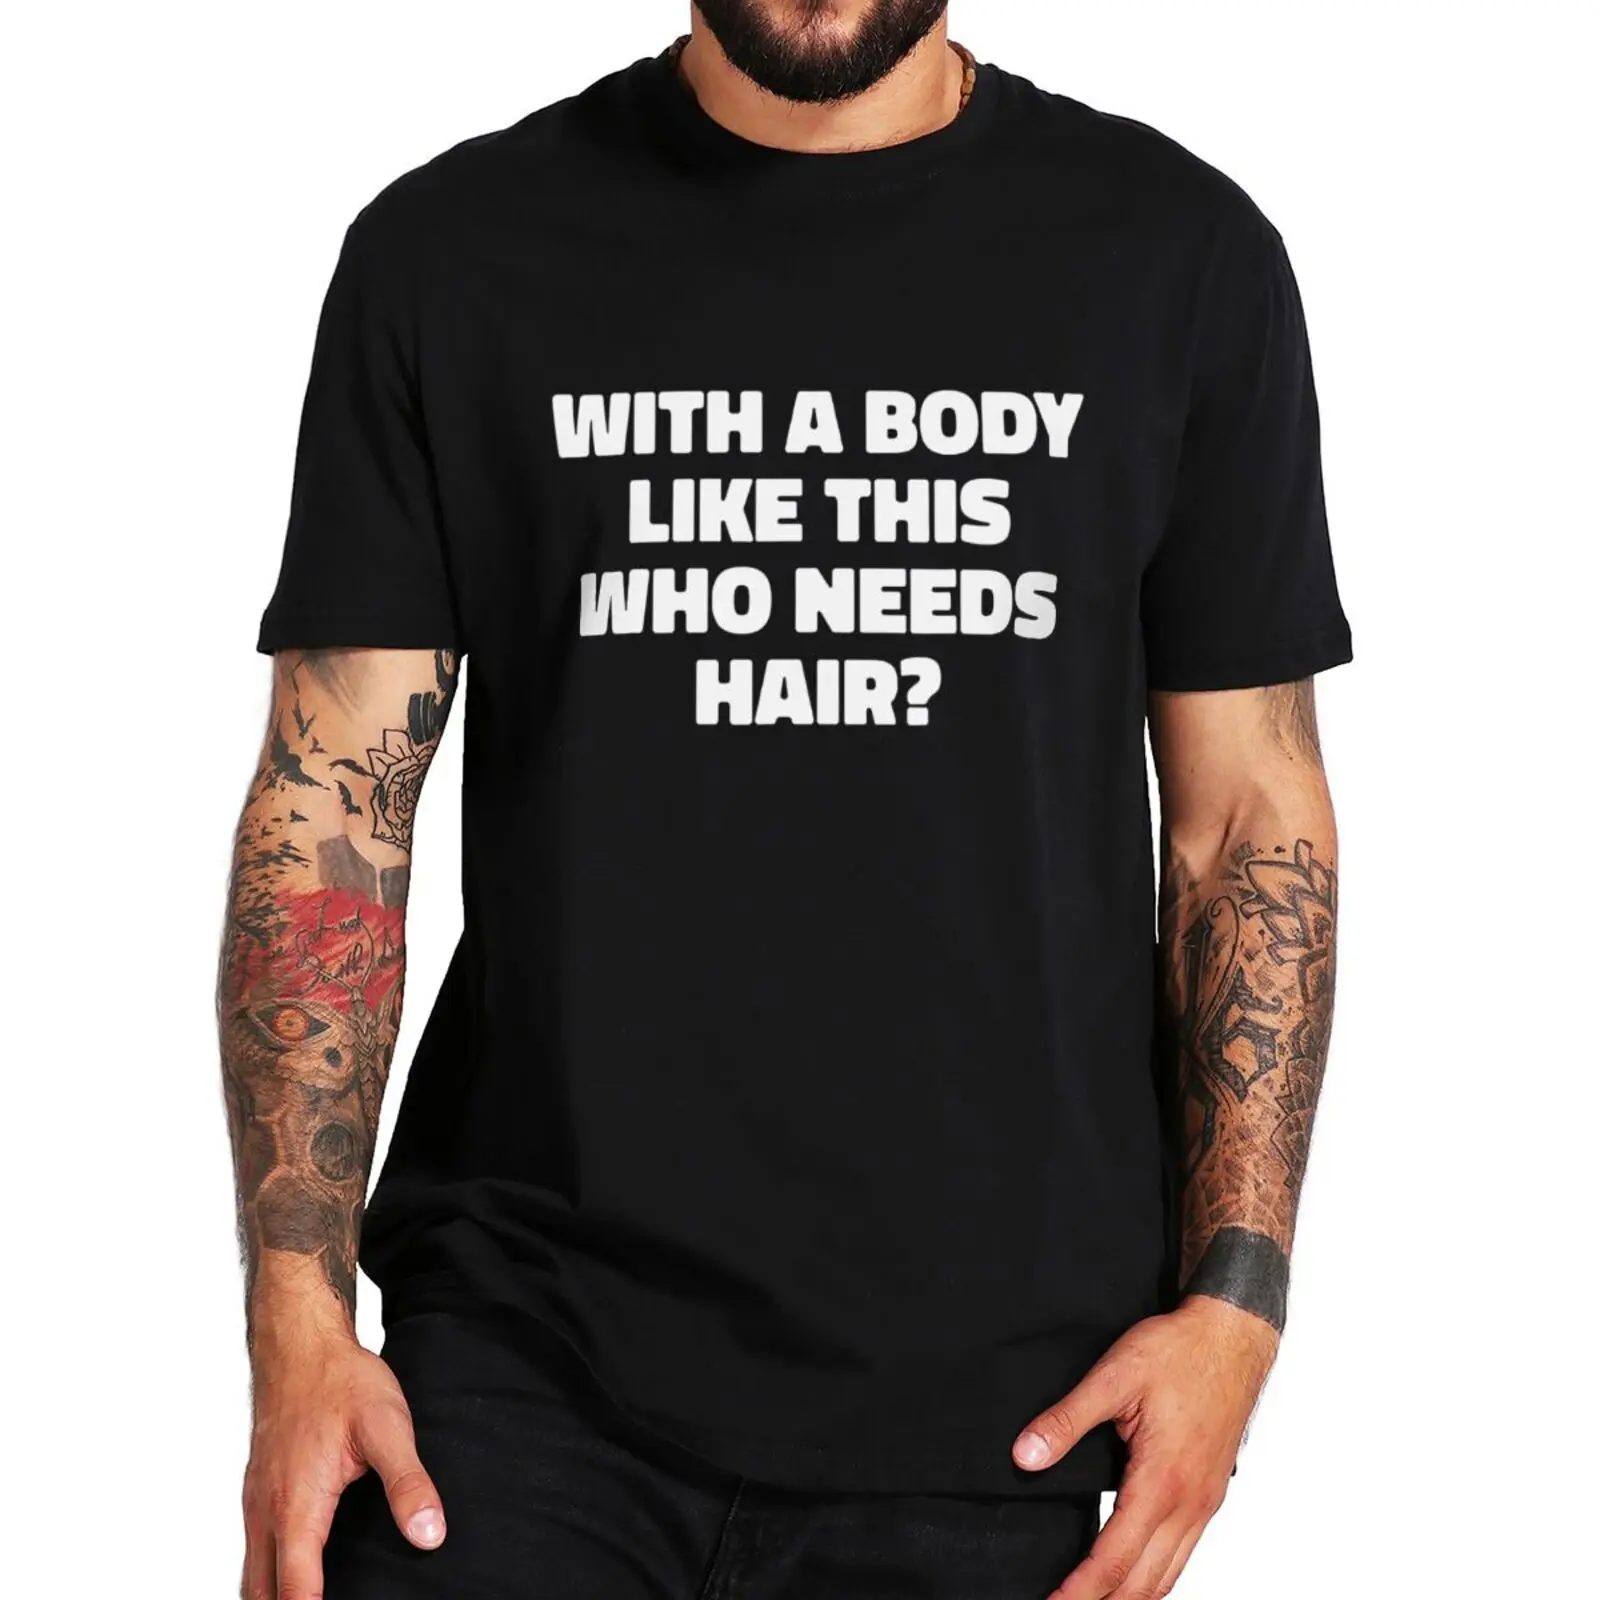 

With A Body Like This Who Needs Hair T Shirt Funny Balding Dad Jokes Gift Tops Casual 100% Cotton Unisex T-shirts EU Size